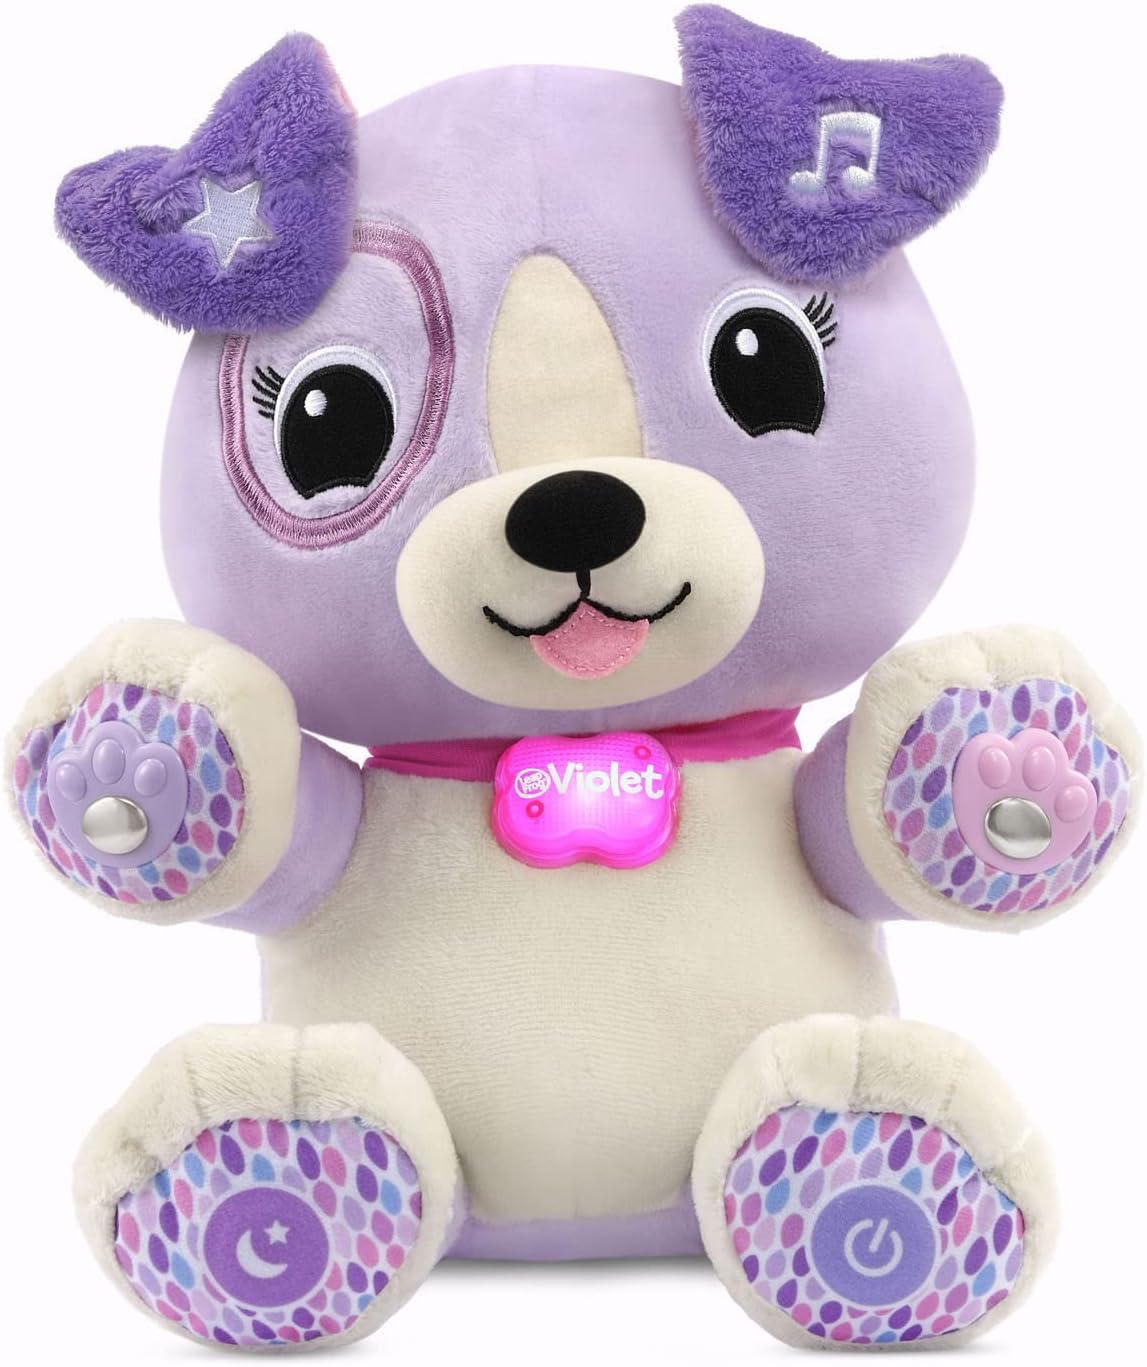 LeapFrog My Pal Violet Personalized Plush Puppy - image 3 of 5